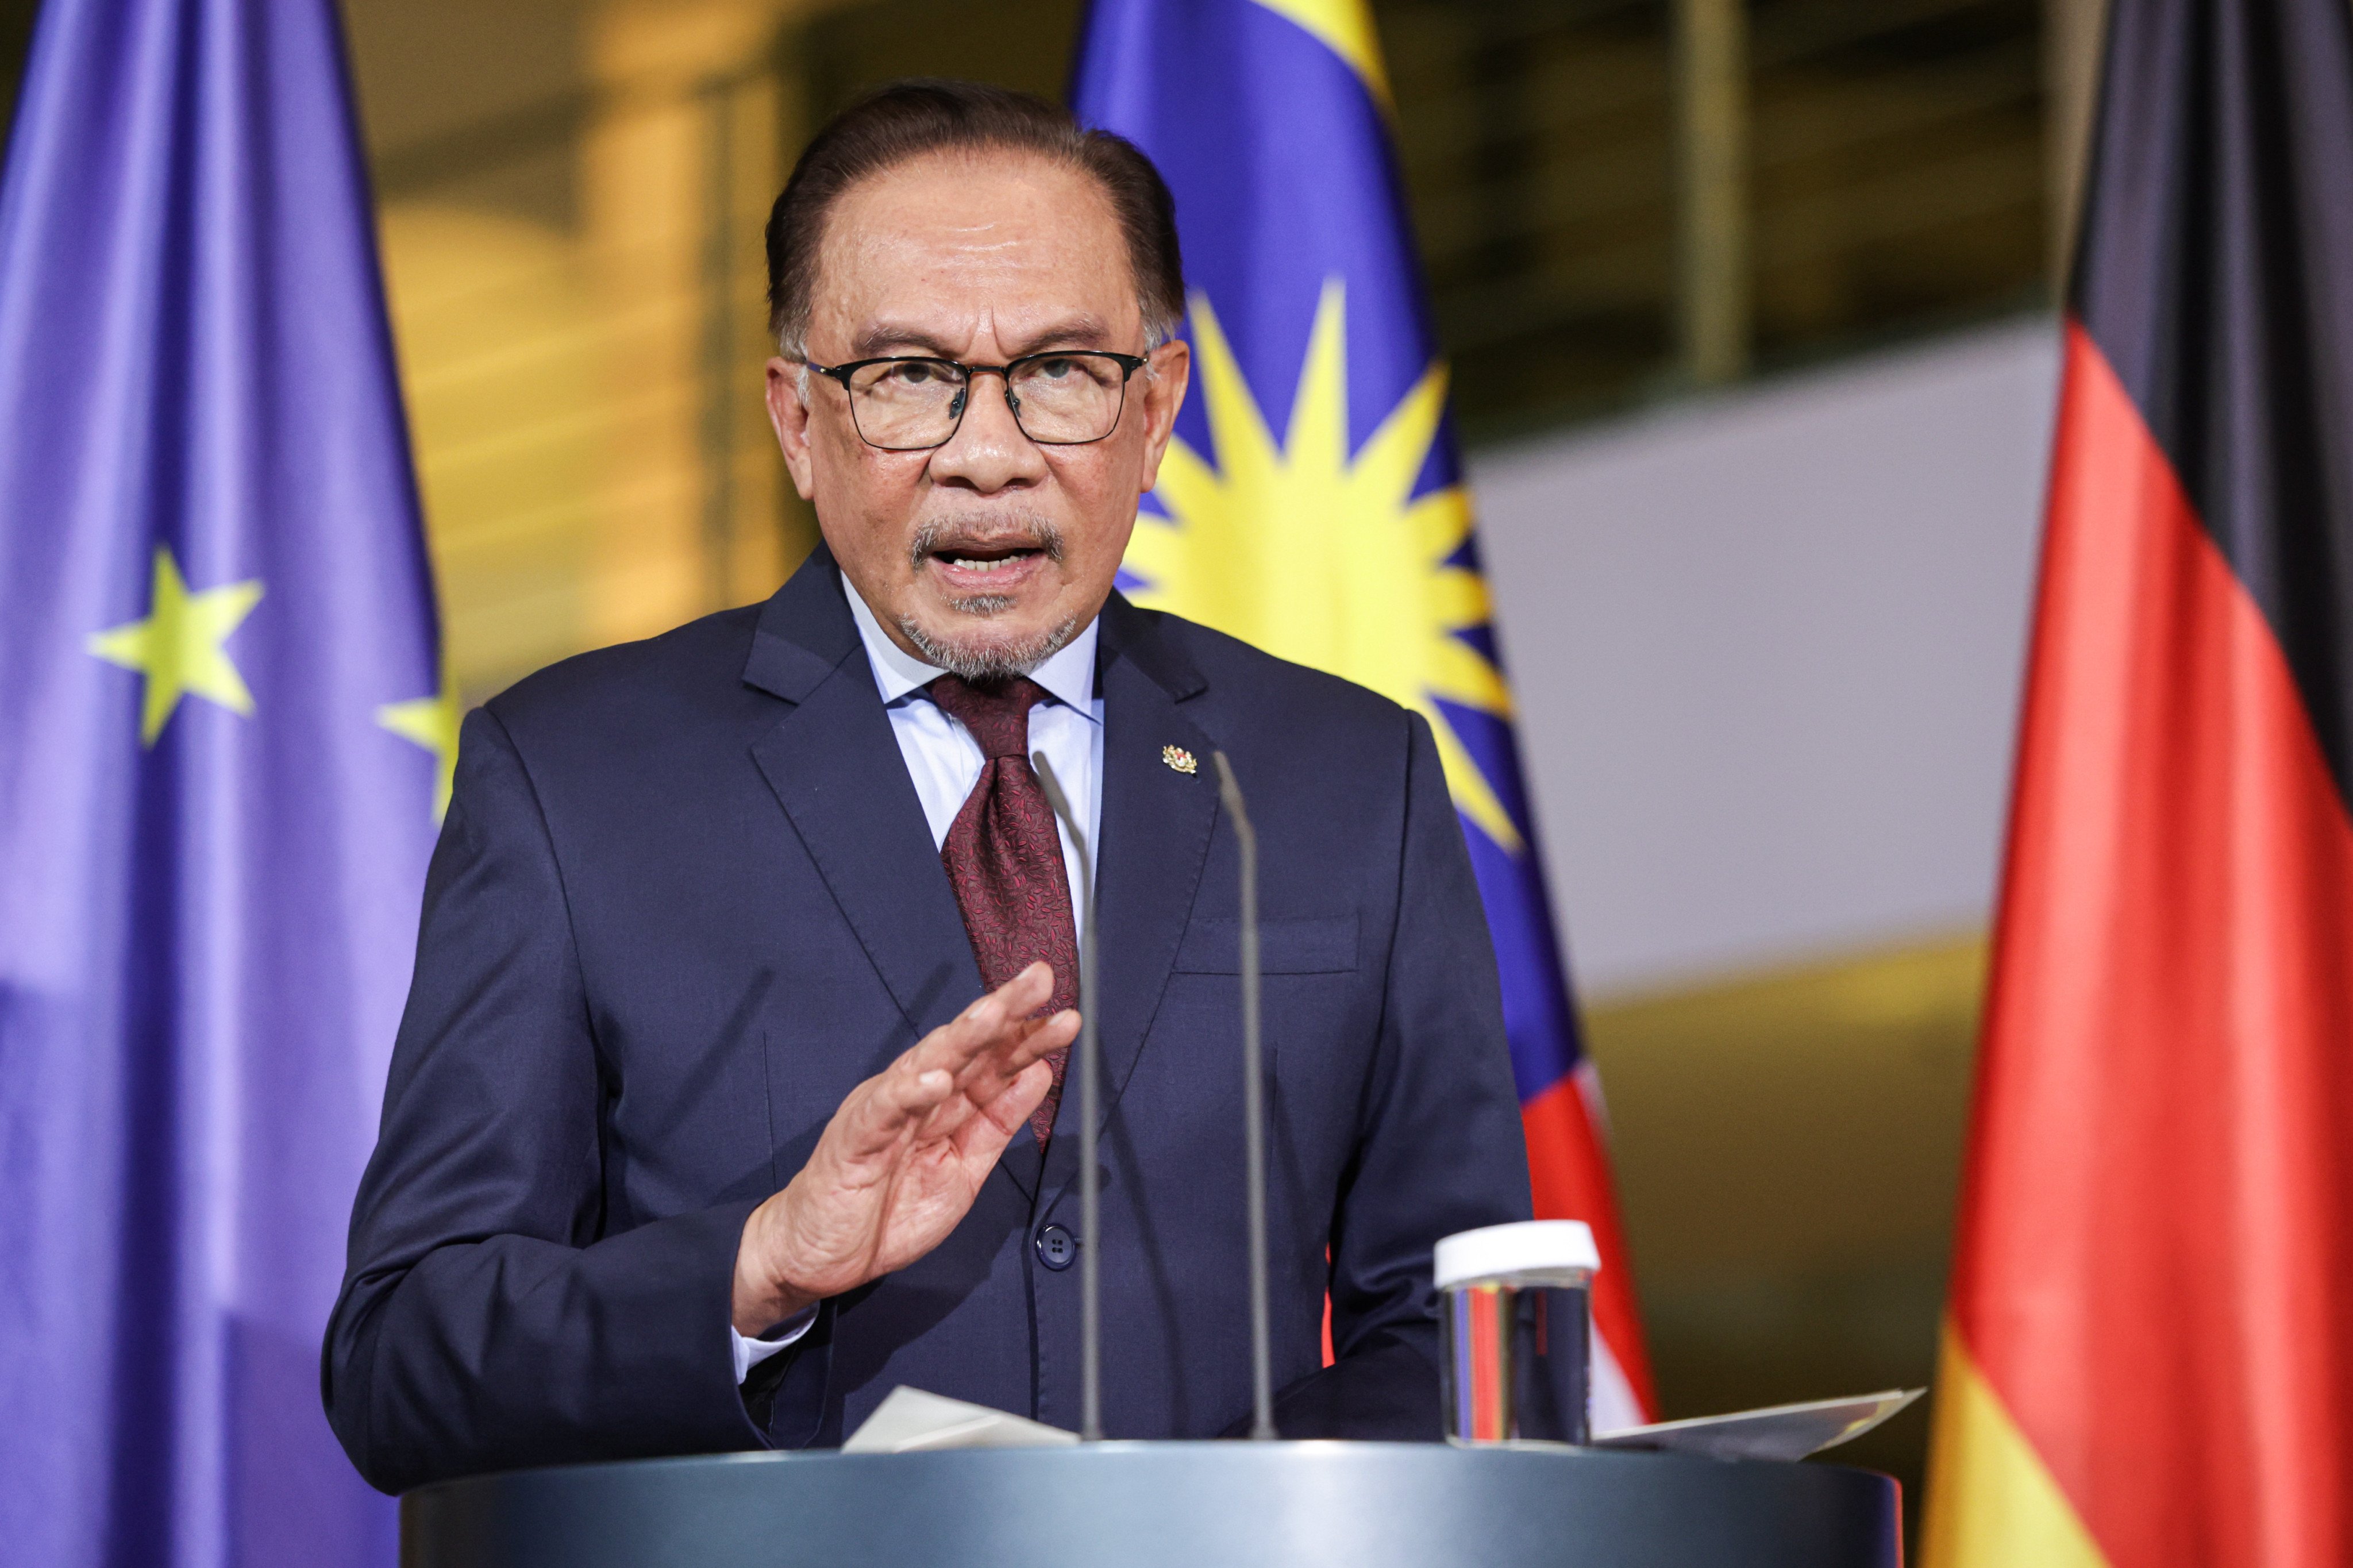 Malaysian Prime Minister Anwar Ibrahim speaks during a press conference with German Chancellor Olaf Scholz after their meeting in Berlin. Photo: dpa